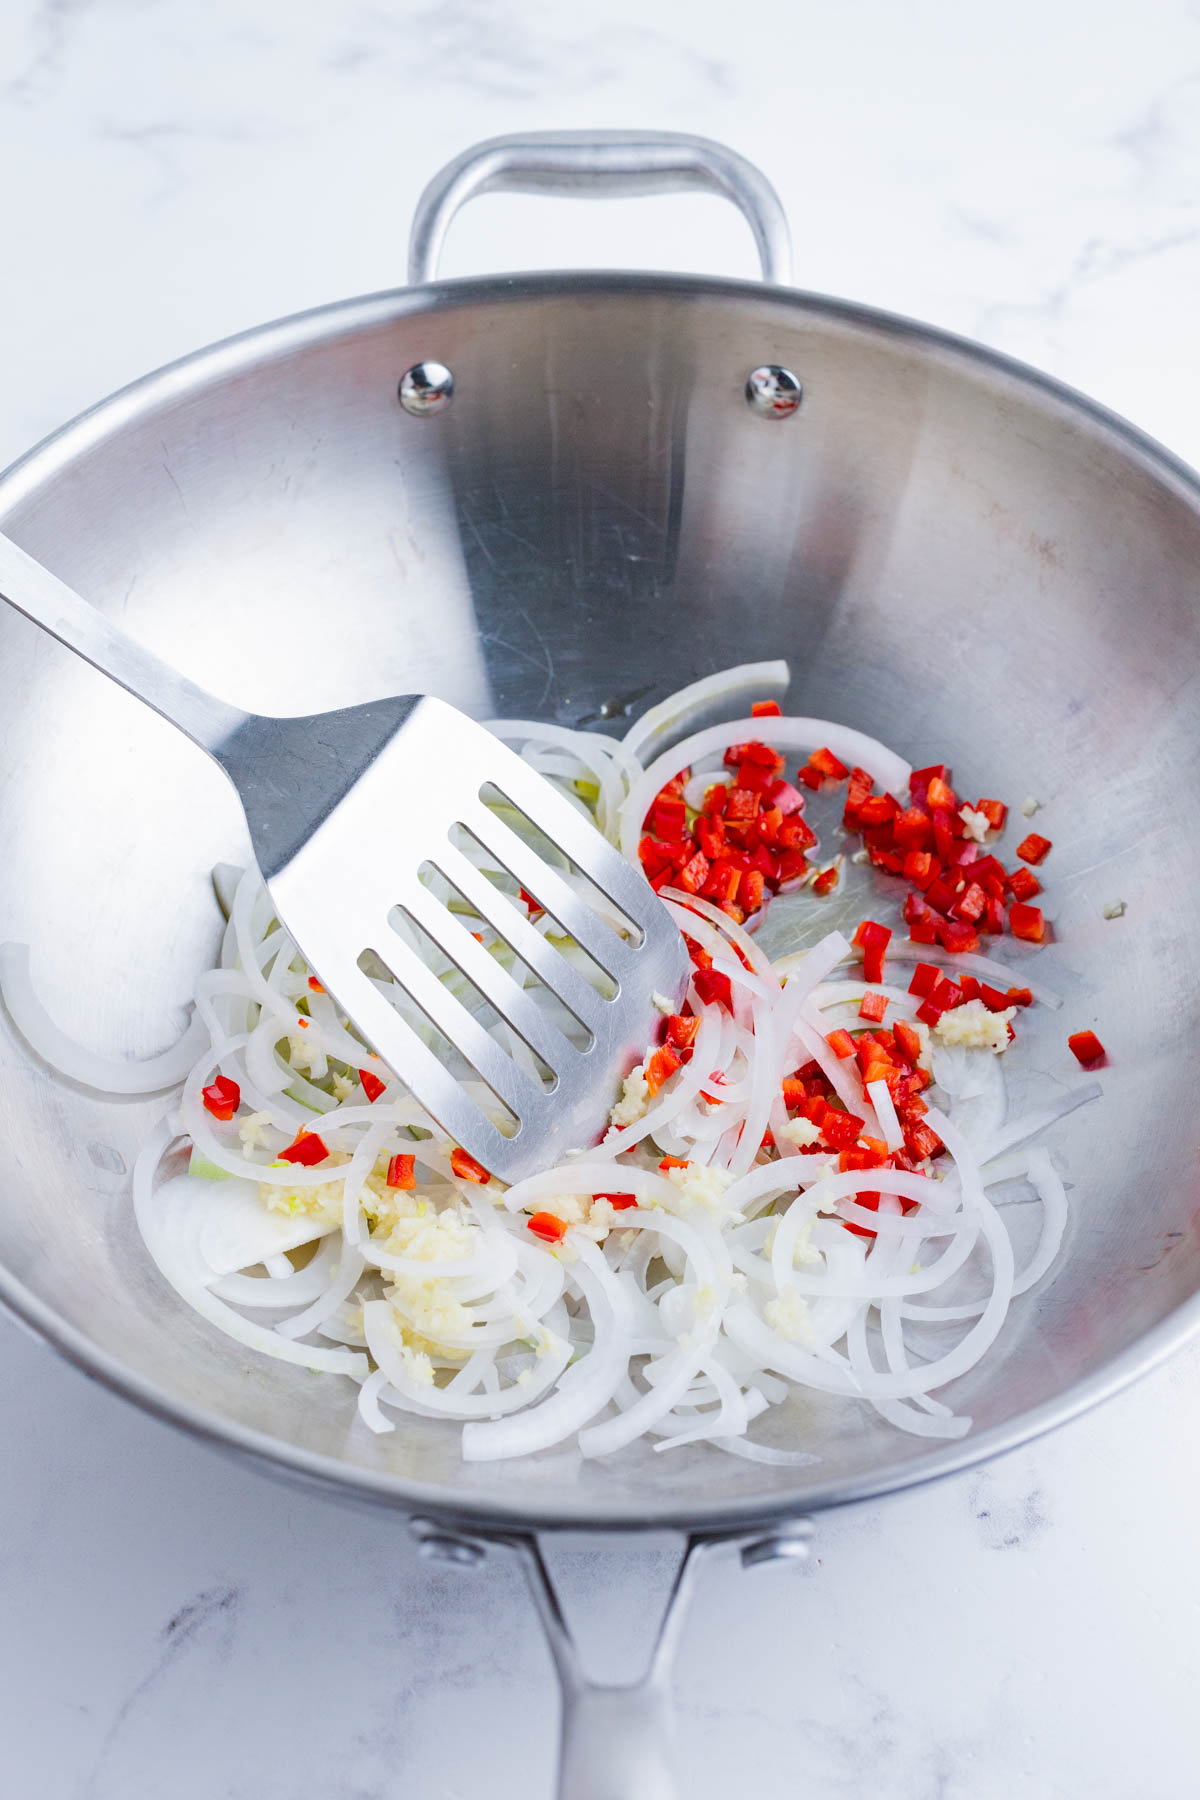 Thai chilies and onion are cooked in a wok.